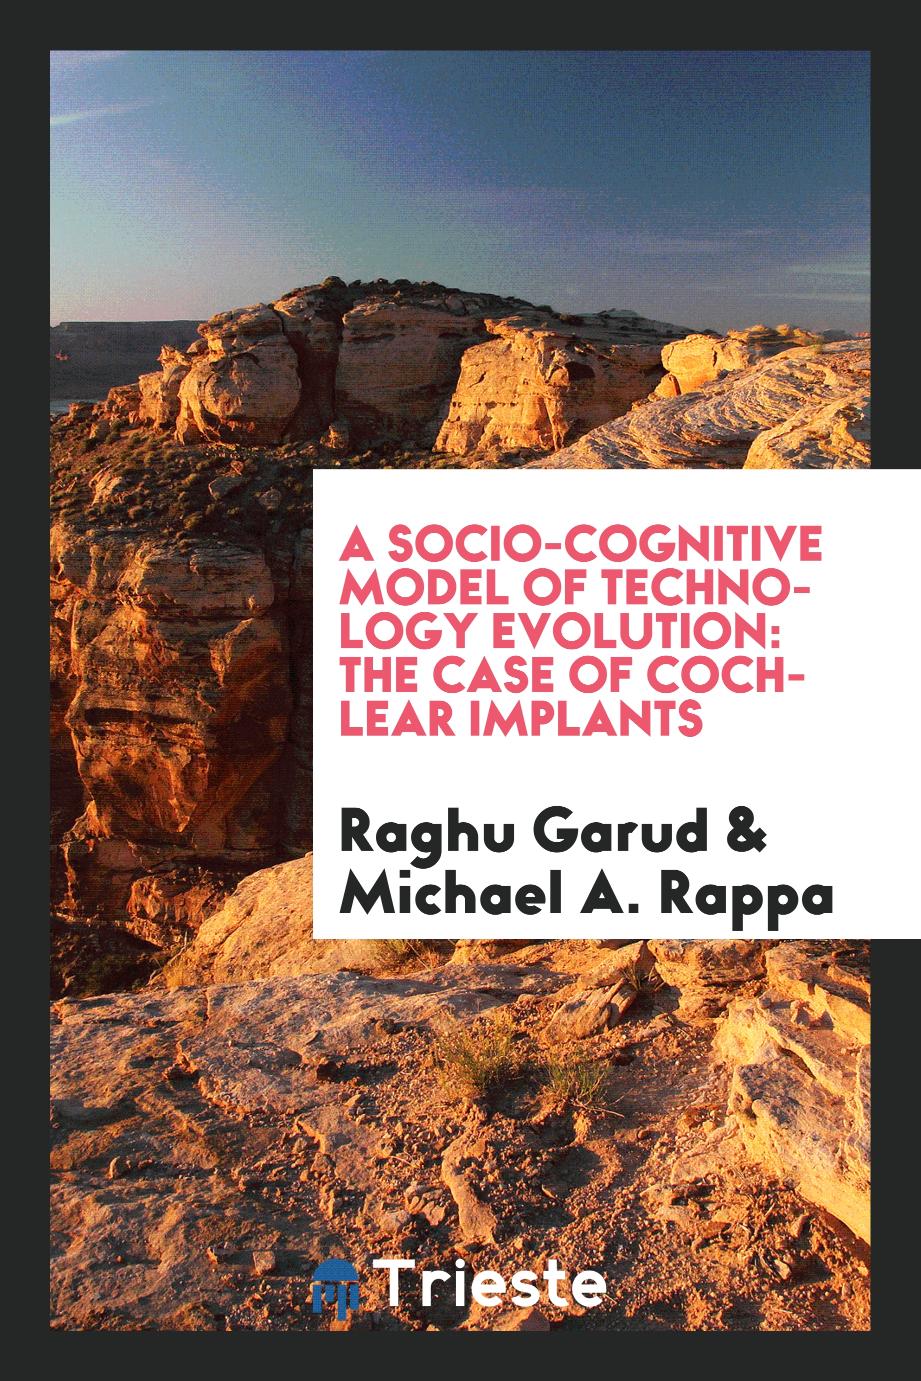 Raghu Garud, Michael A. Rappa - A socio-cognitive model of technology evolution: the case of cochlear implants